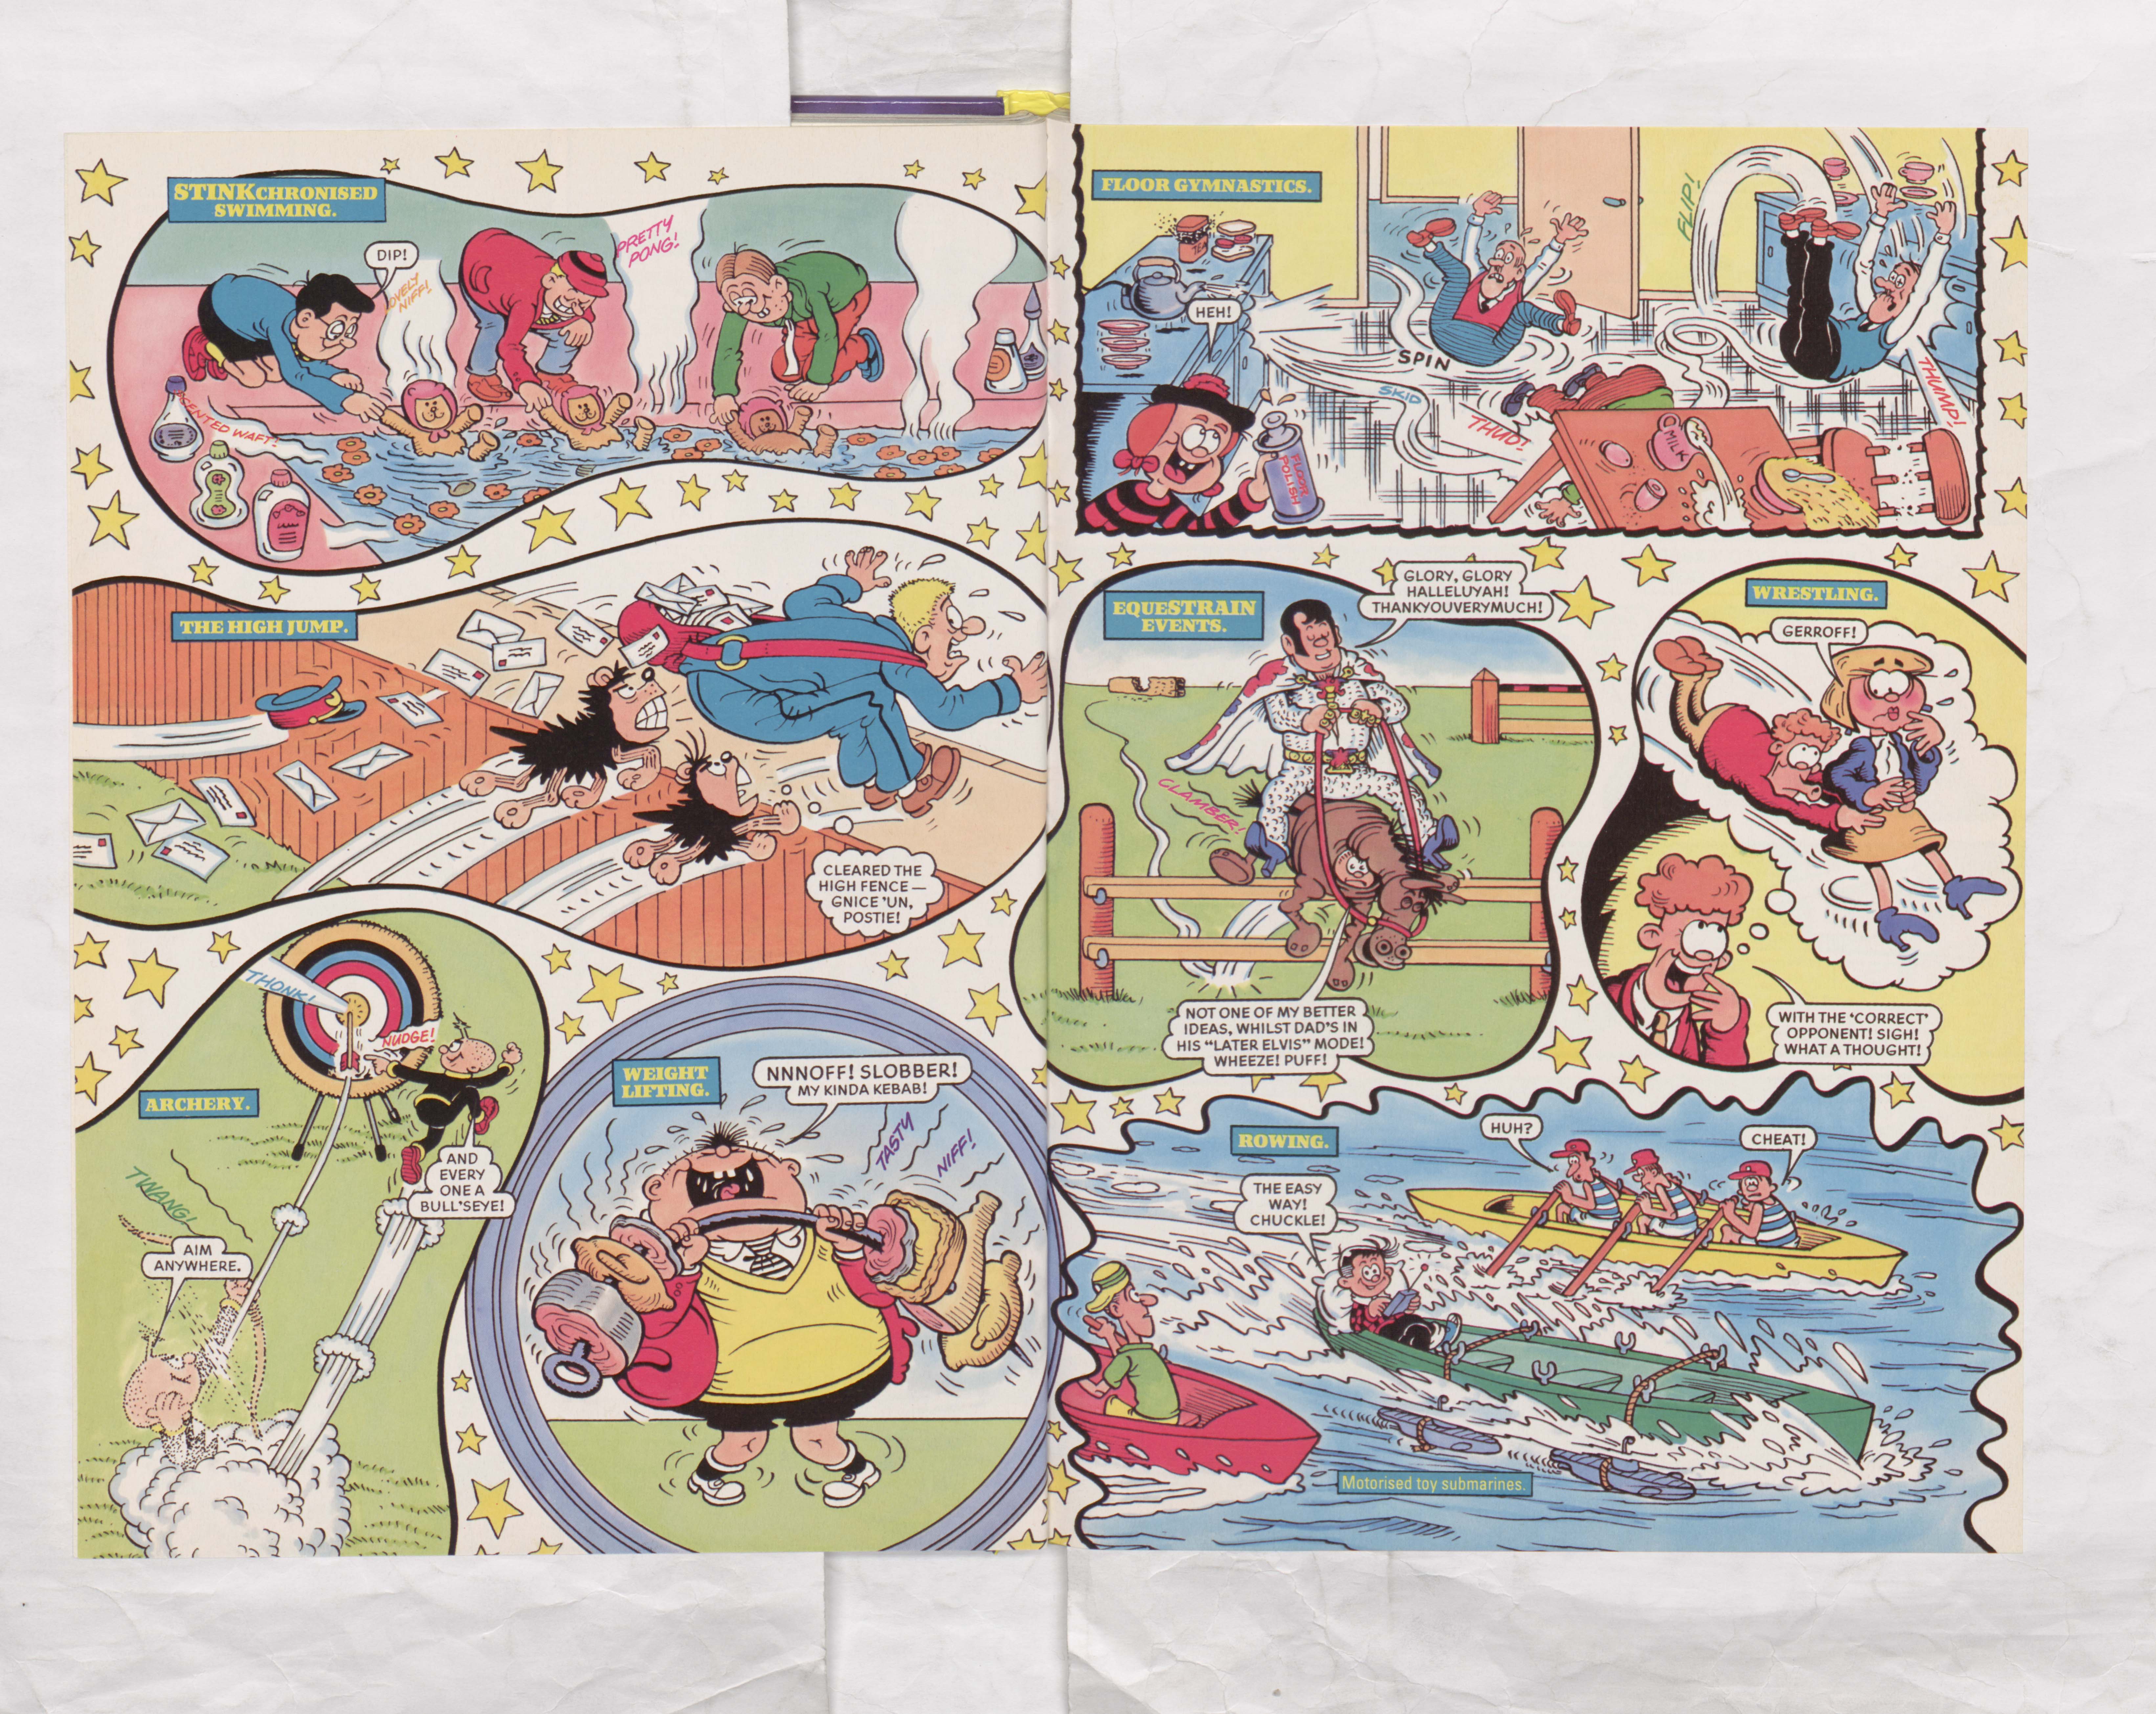 The Beano Stars Cruise Round the World - Beano Book 2000 Annual - Page 12 and 13